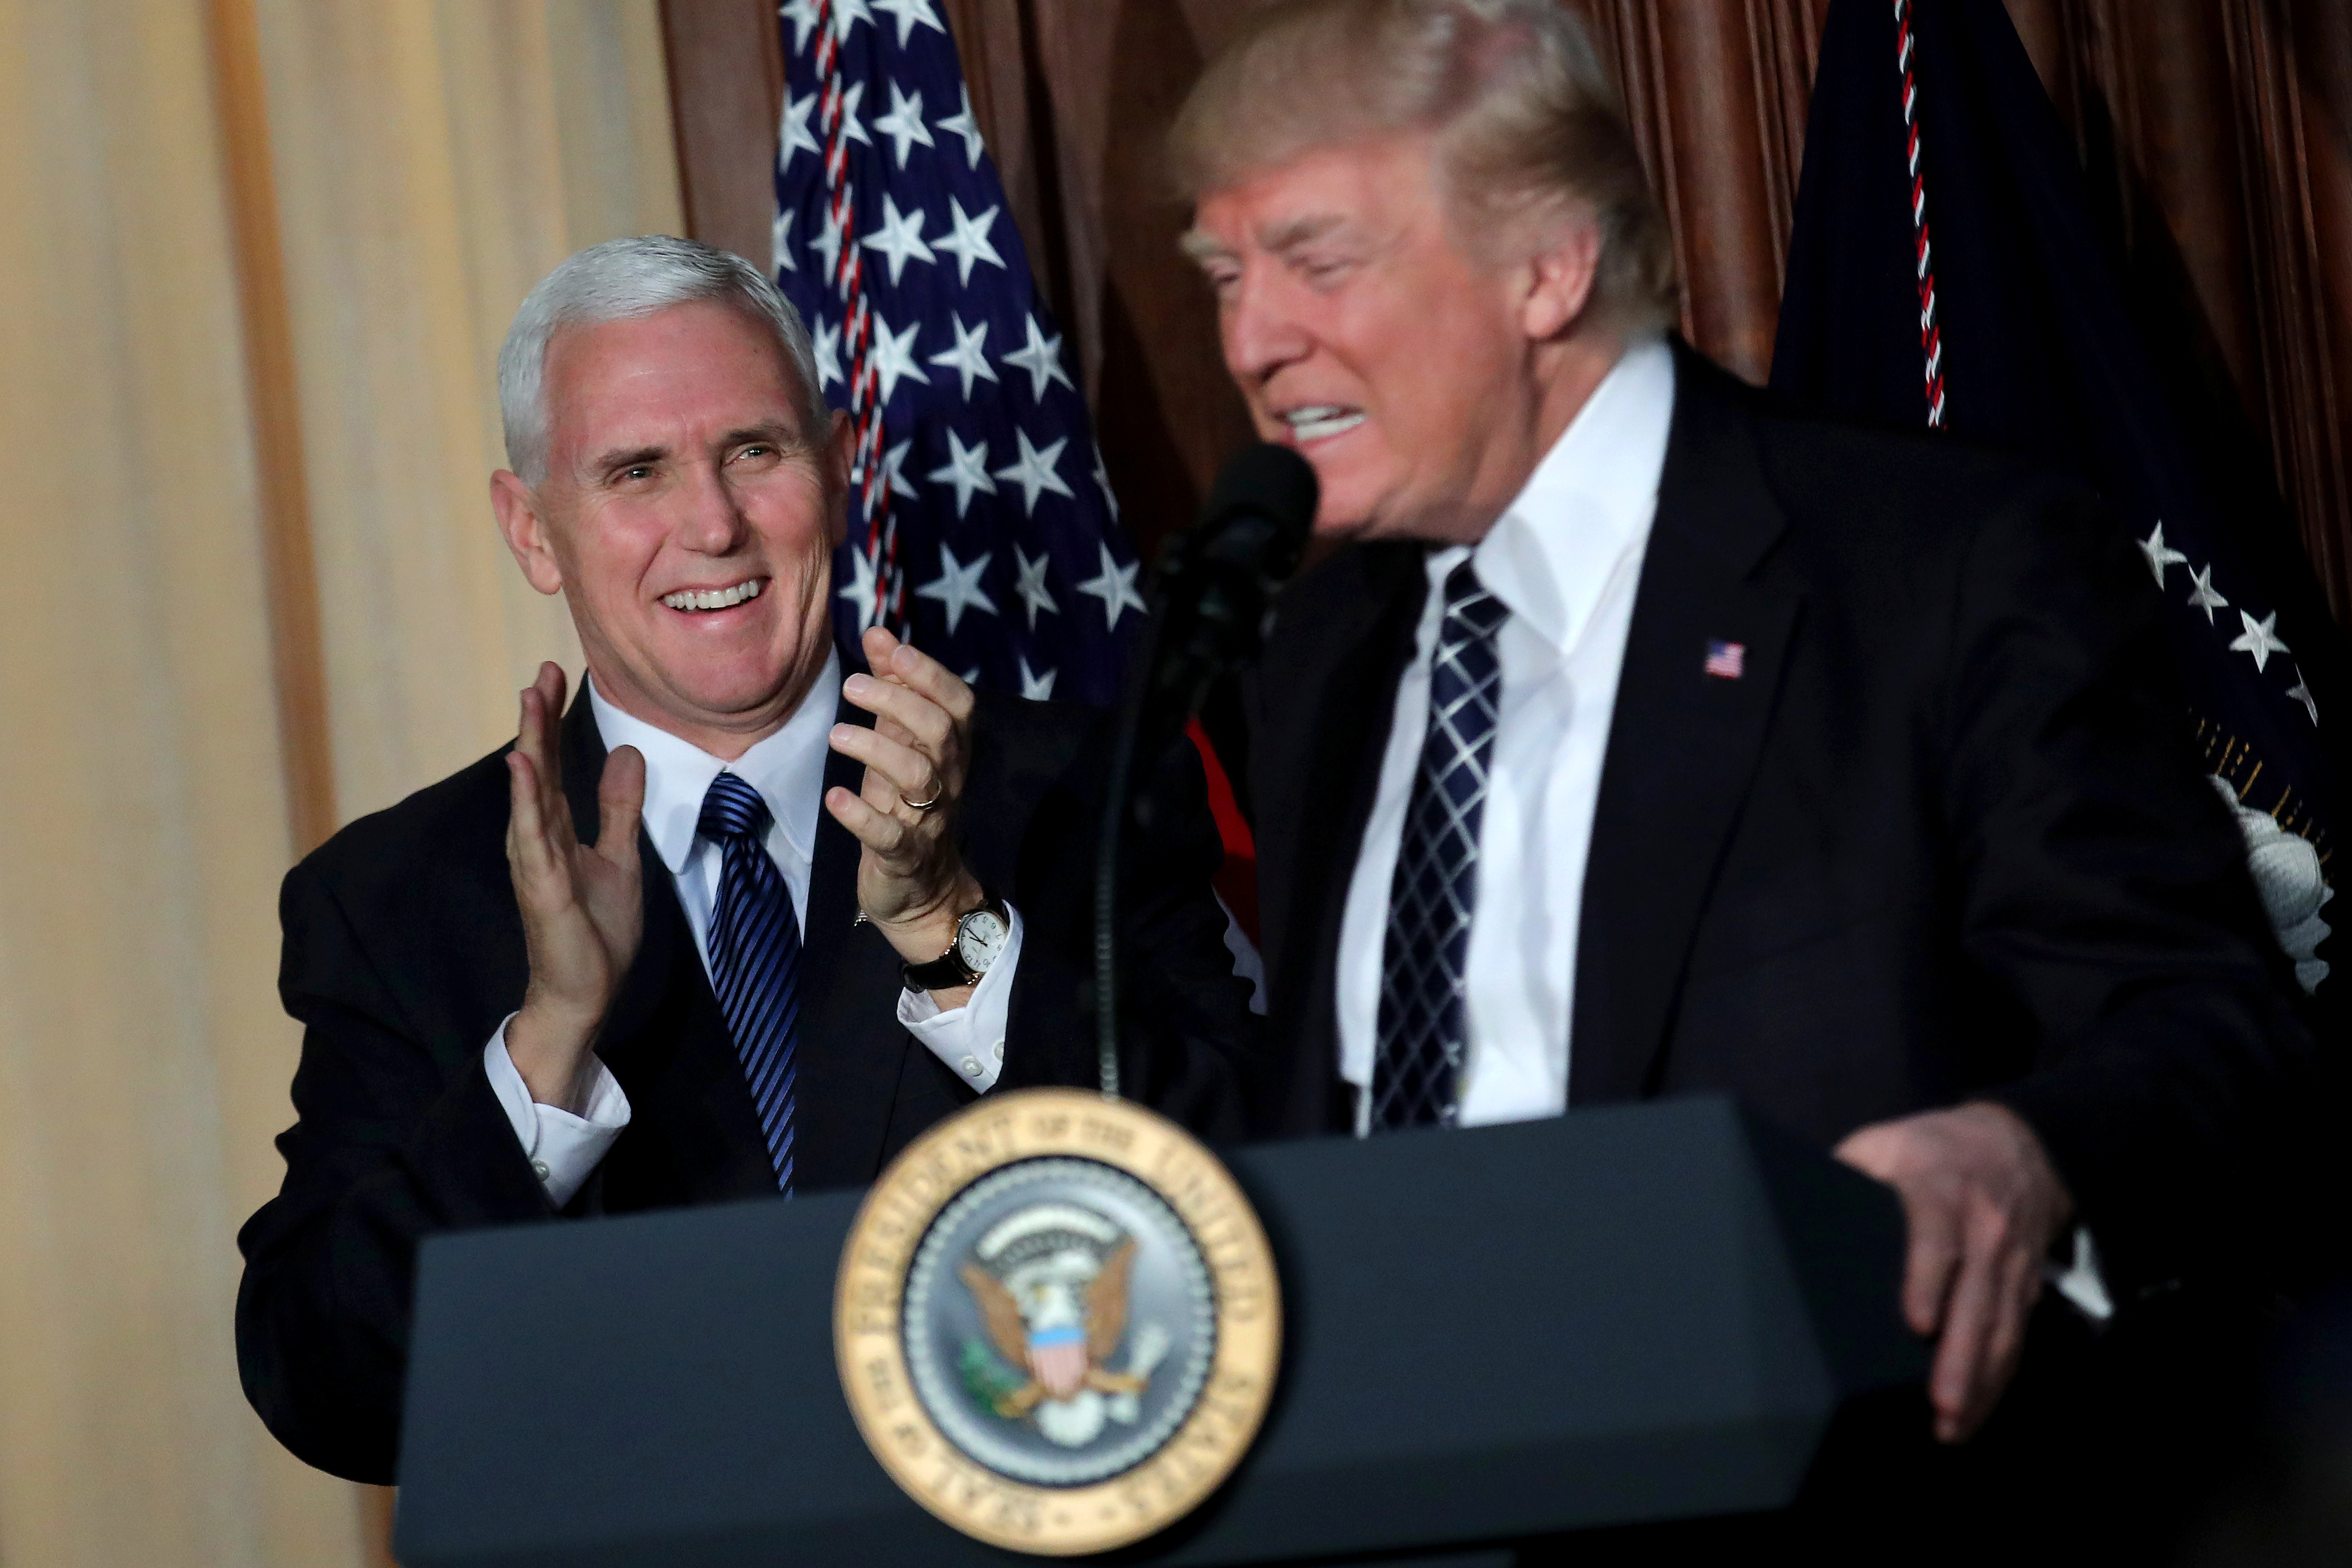 U.S. President Donald Trump reacts as he is introduced by Vice President Mike Pence during the signing of an executive order on 